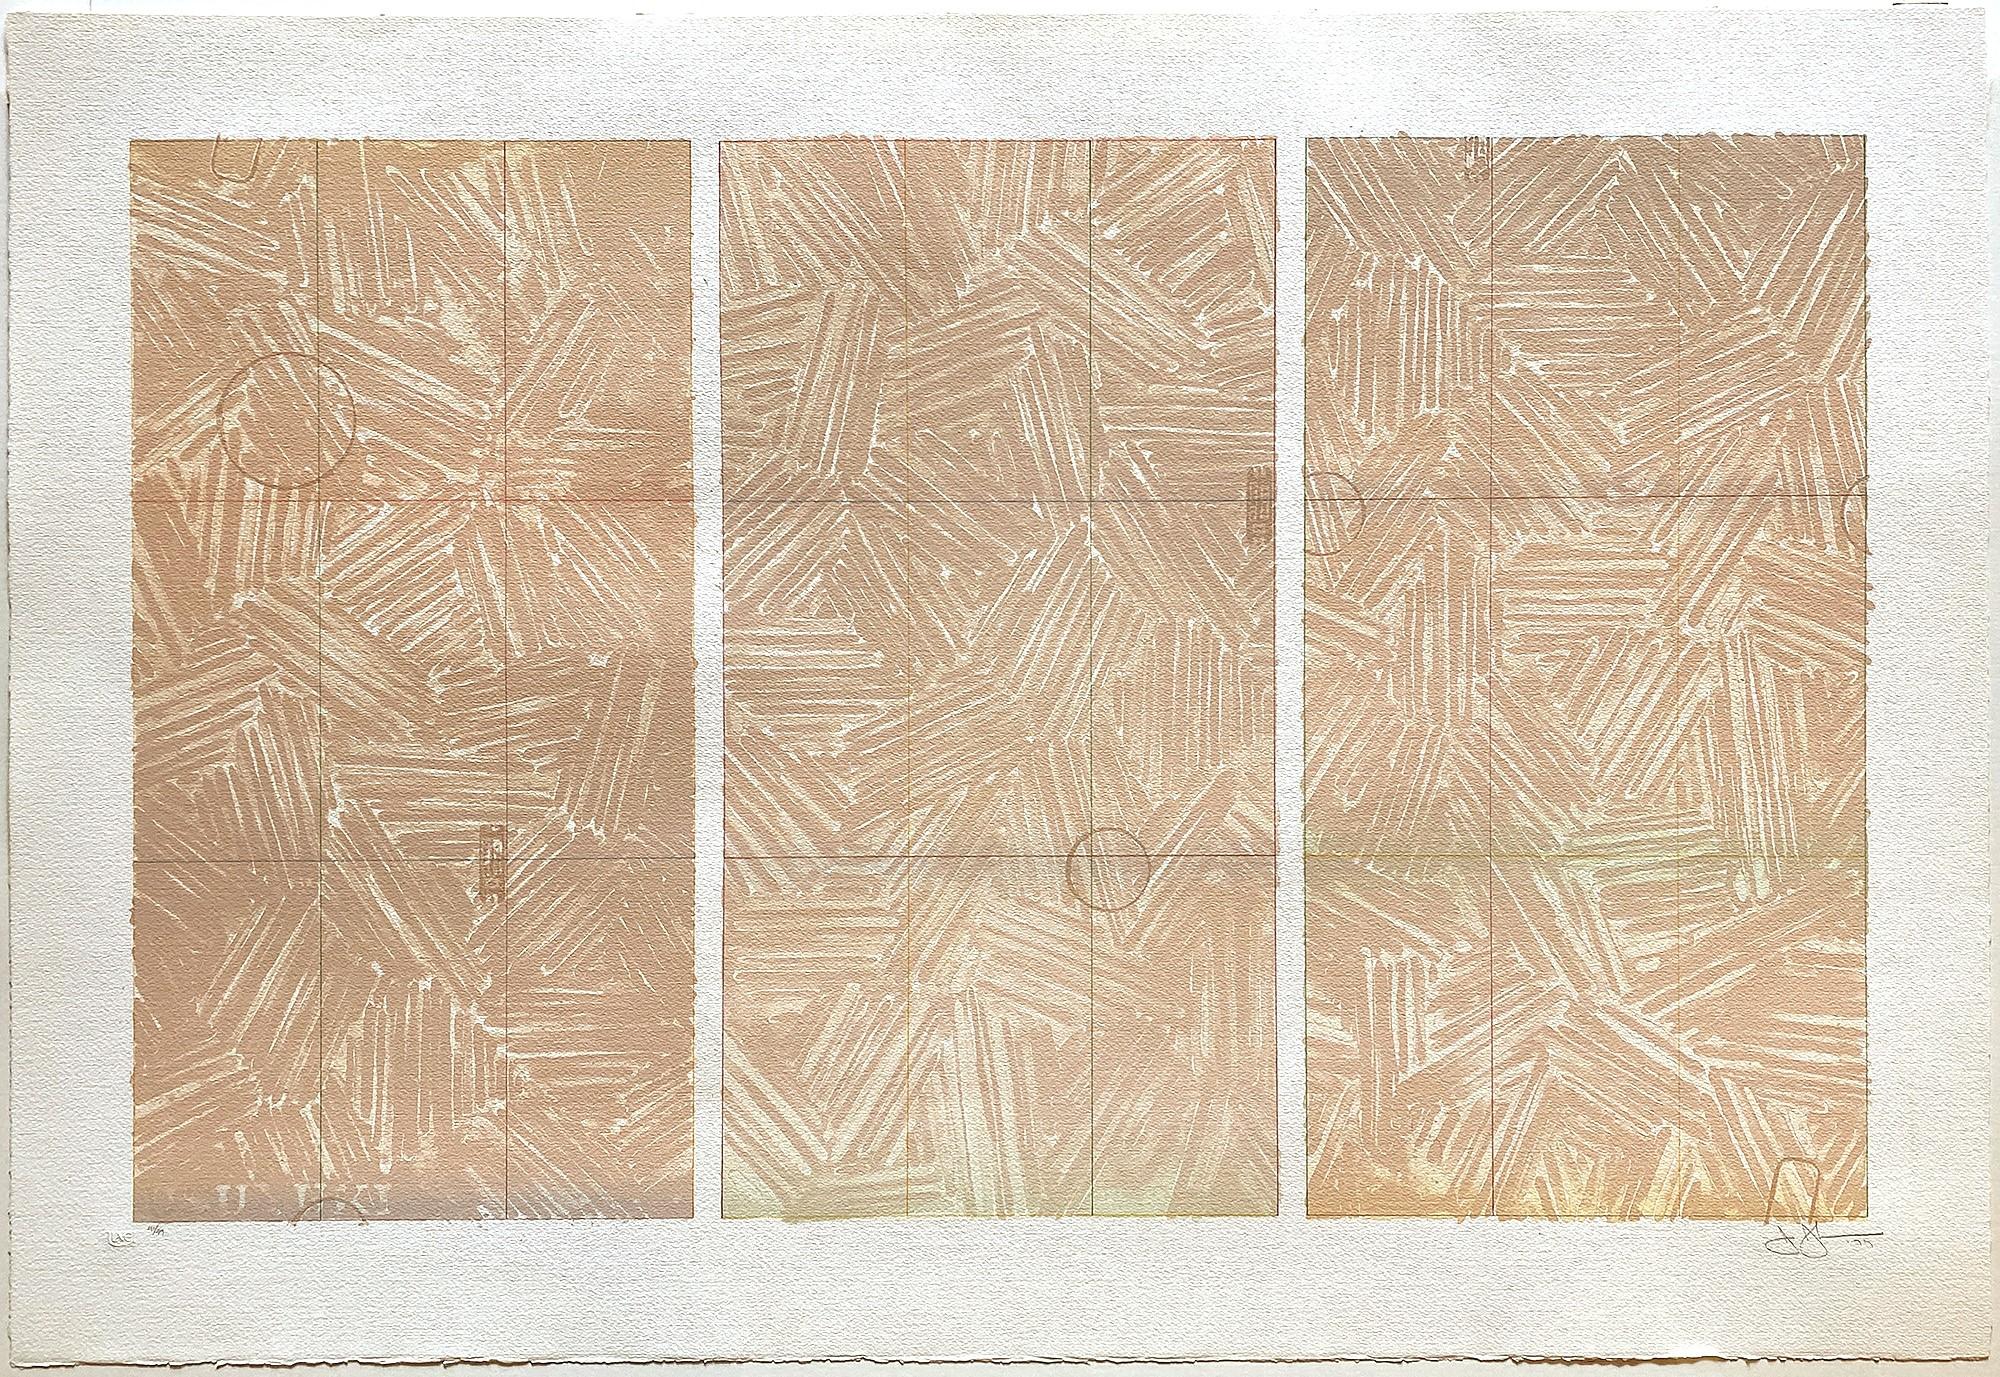 Jasper Johns has long explored a range of expressive variations using a crosshatching motif. Works with the title Usuyuki are named after the Japanese word for light snow. In 1979, the artist created this original print as a lithograph with the most